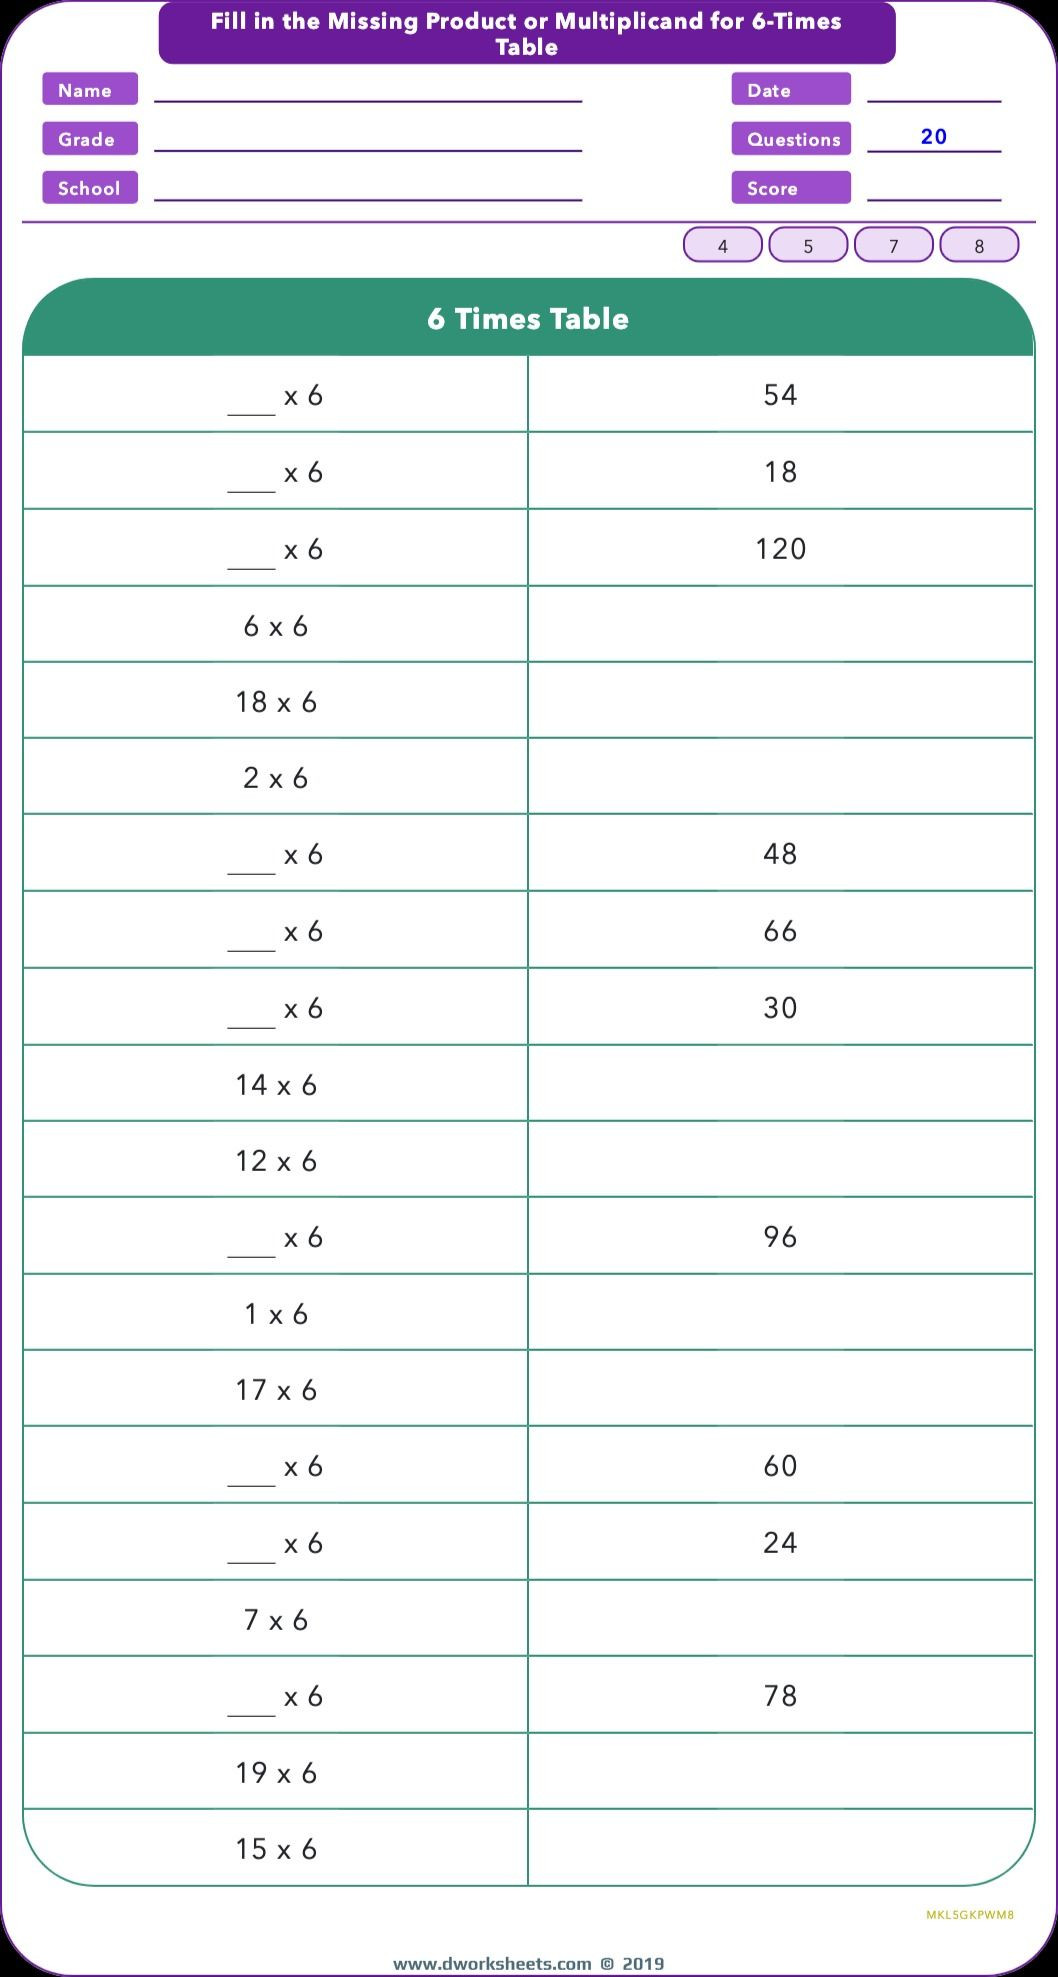 6 Times Table Worksheet Practice 6 Times Table by Filling Missing Product or